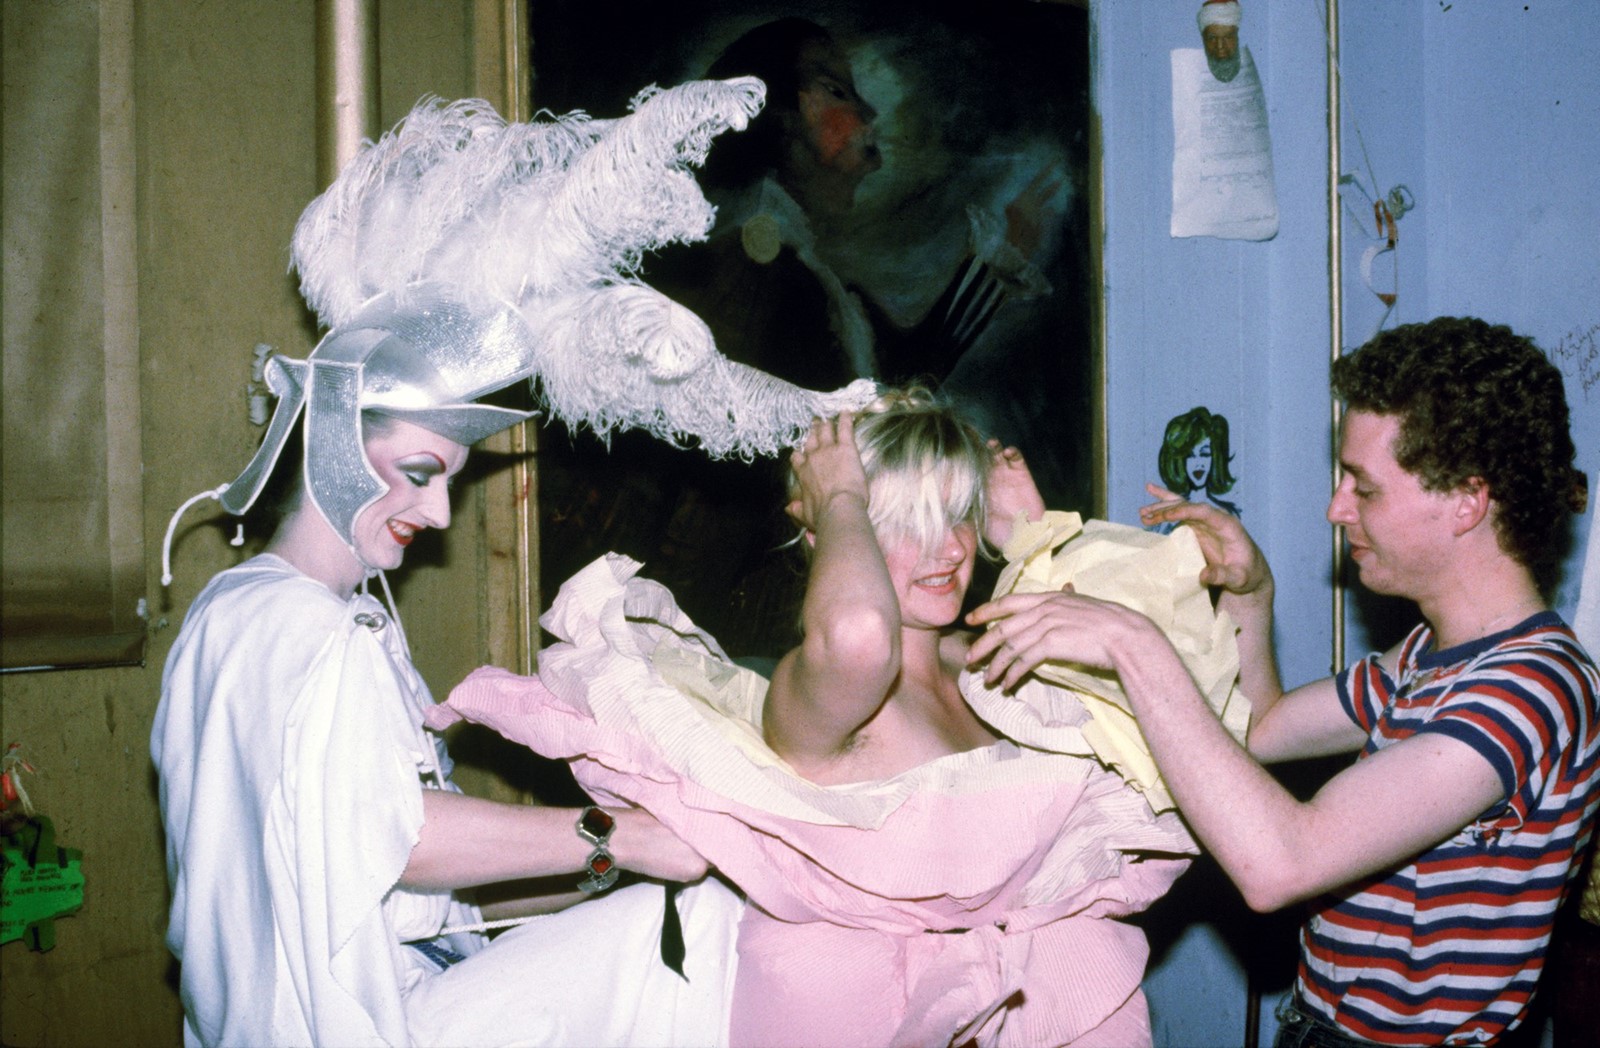 Neo Naturists, Paper Dress at the Embassy Club wit